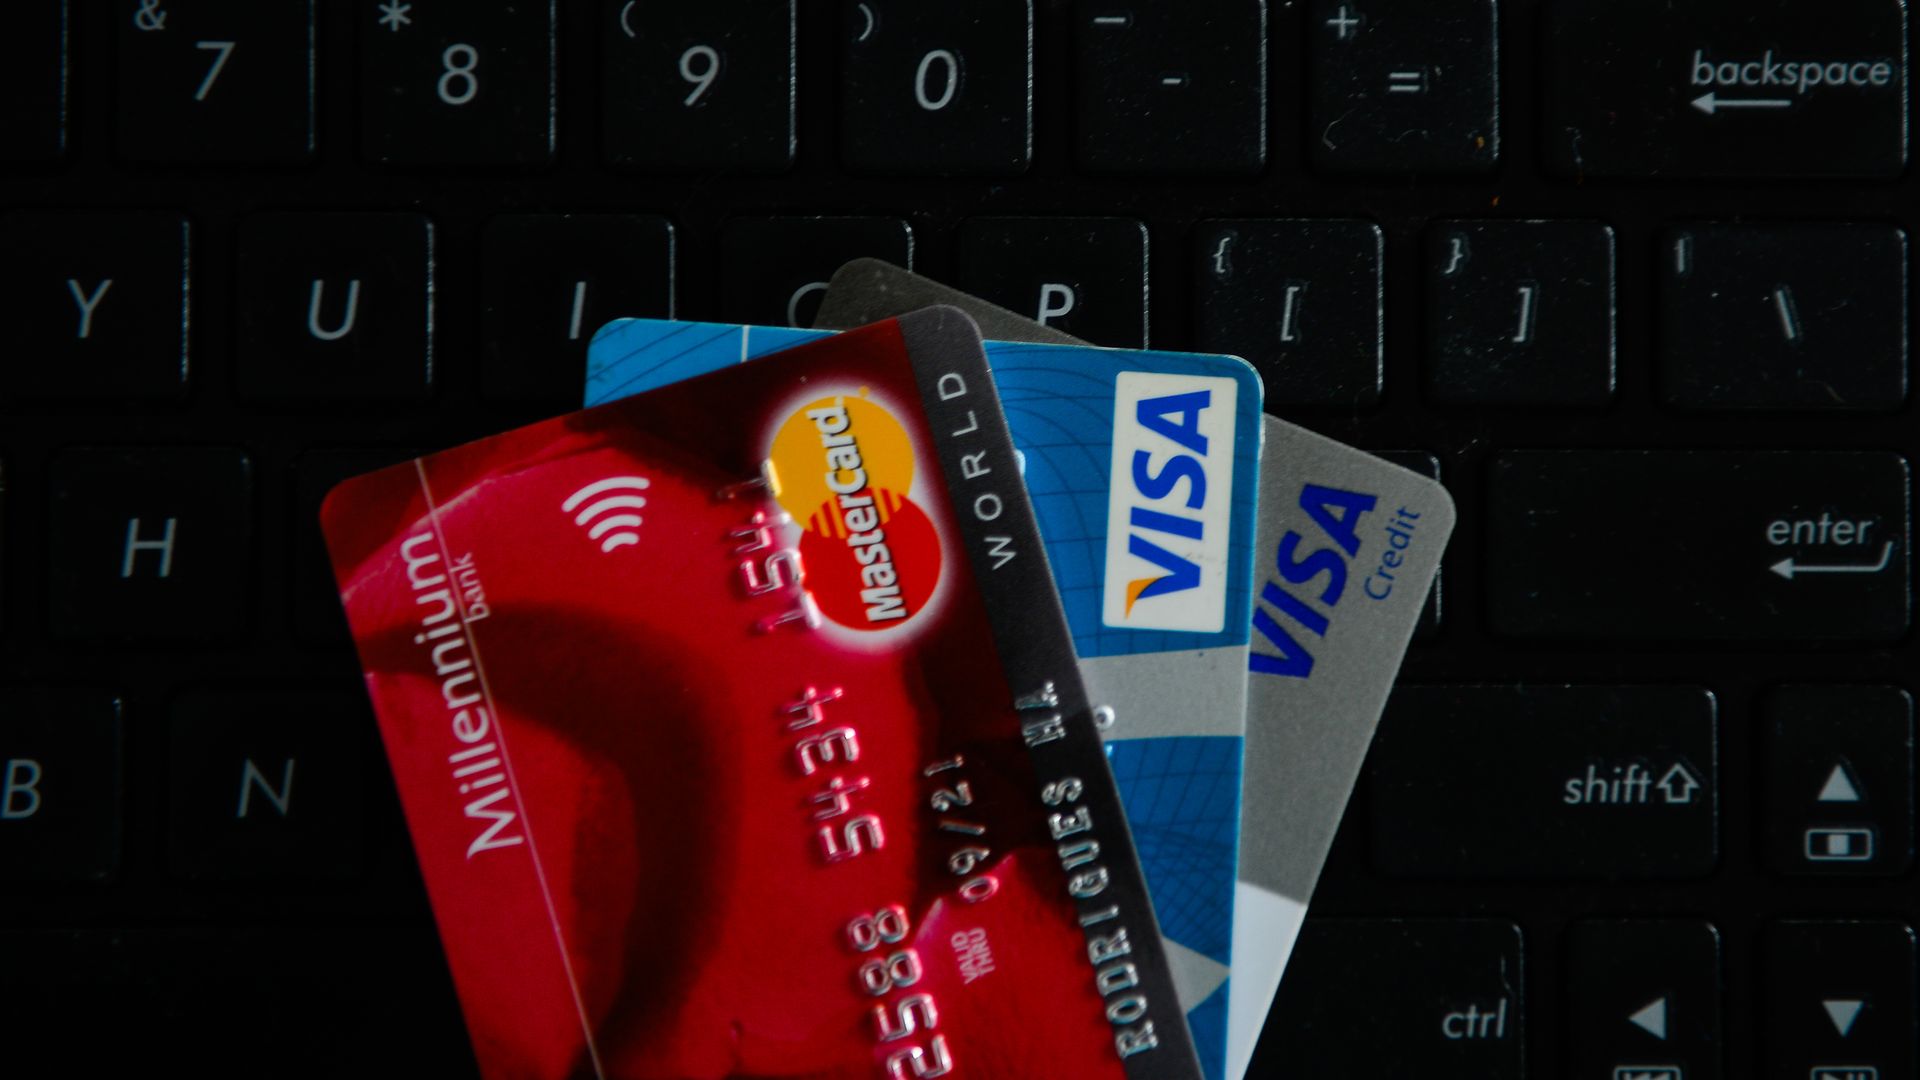 VISA and Mastercards credit cards are seen on the top of a laptop keyboard